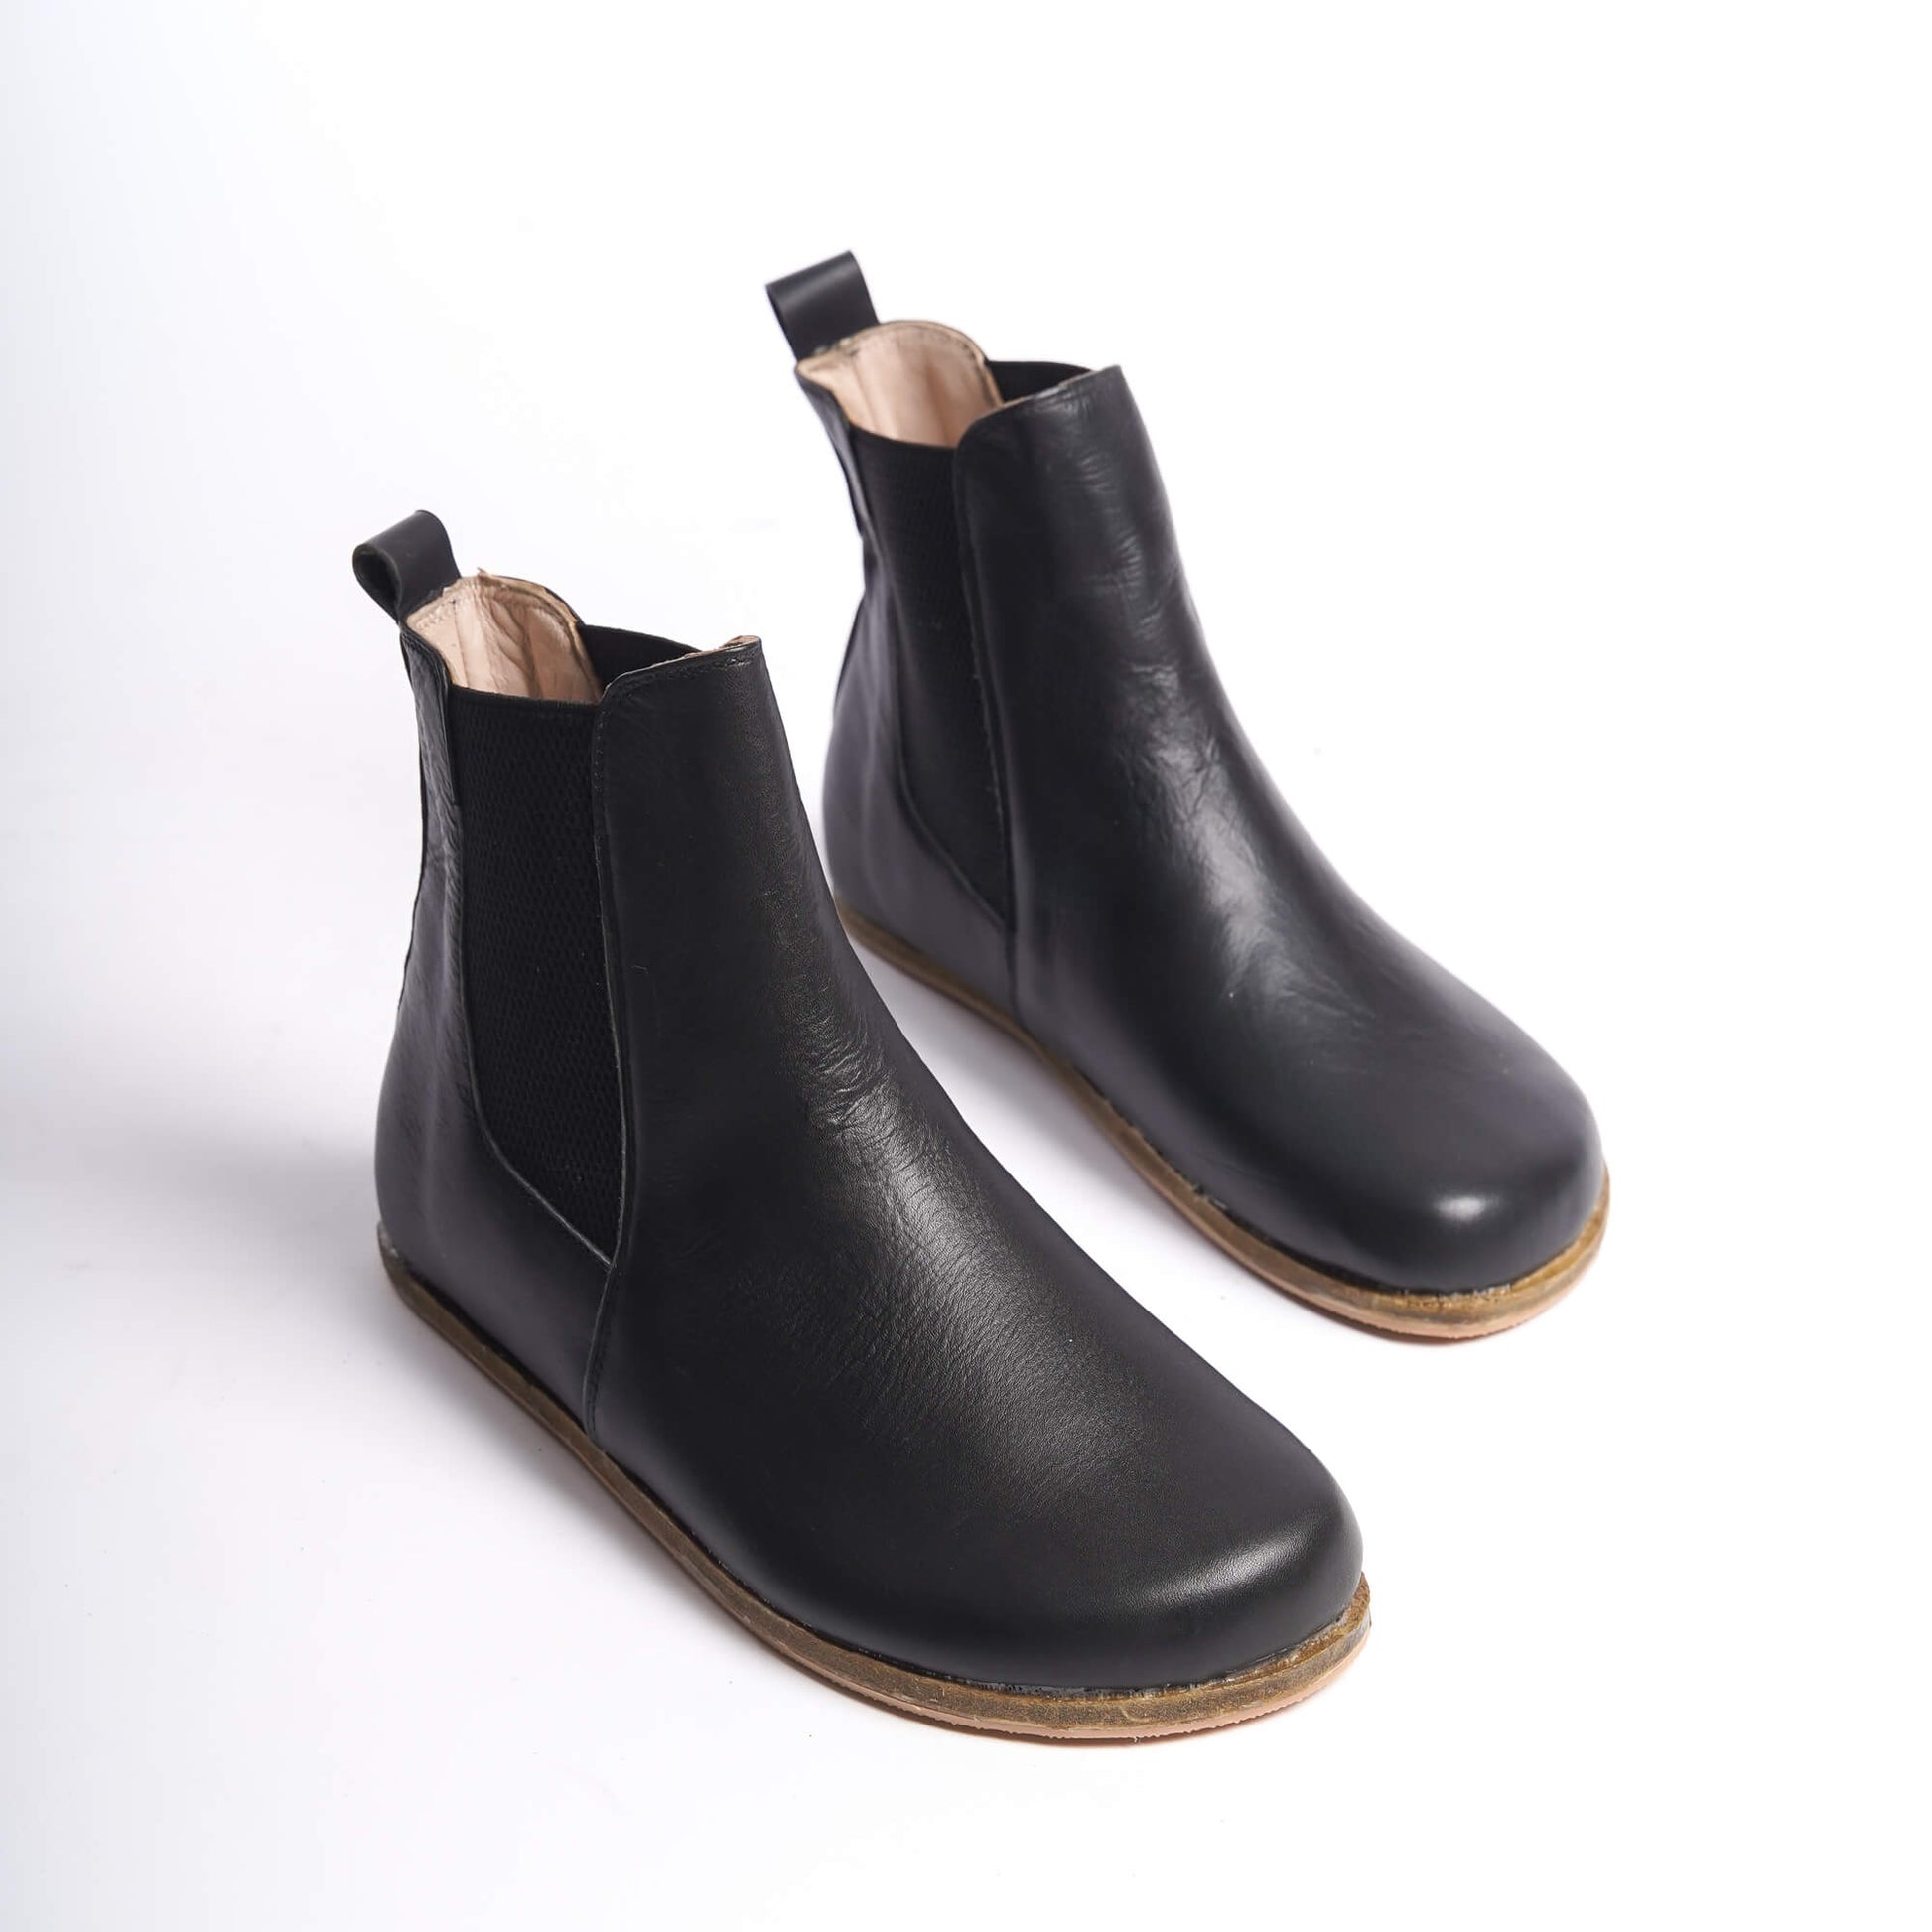 Black Chelsea boots for women with a wide toe box, crafted from premium natural leather. Ideal for minimalist style and ultimate comfort.